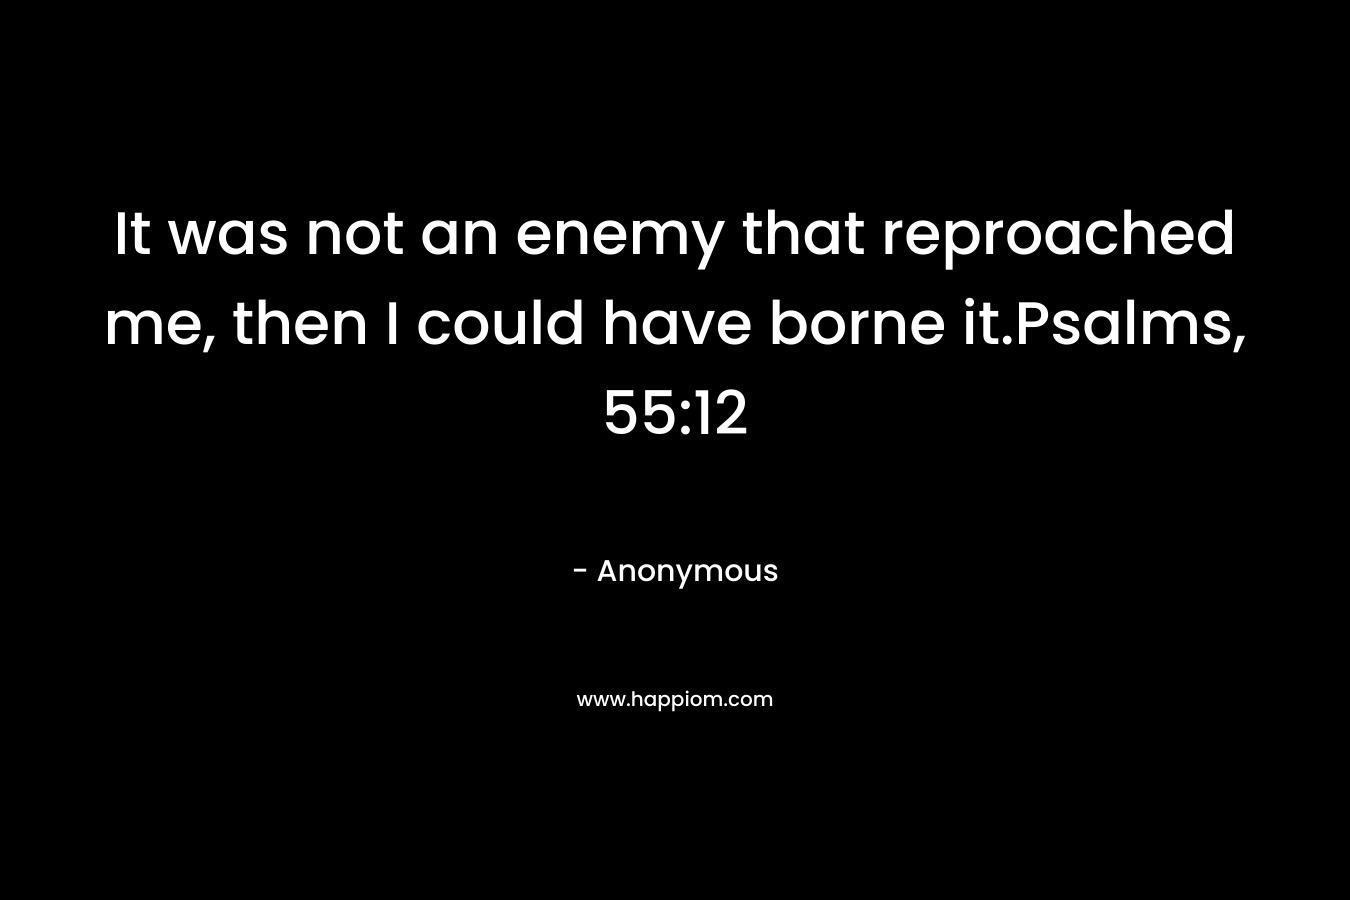 It was not an enemy that reproached me, then I could have borne it.Psalms, 55:12